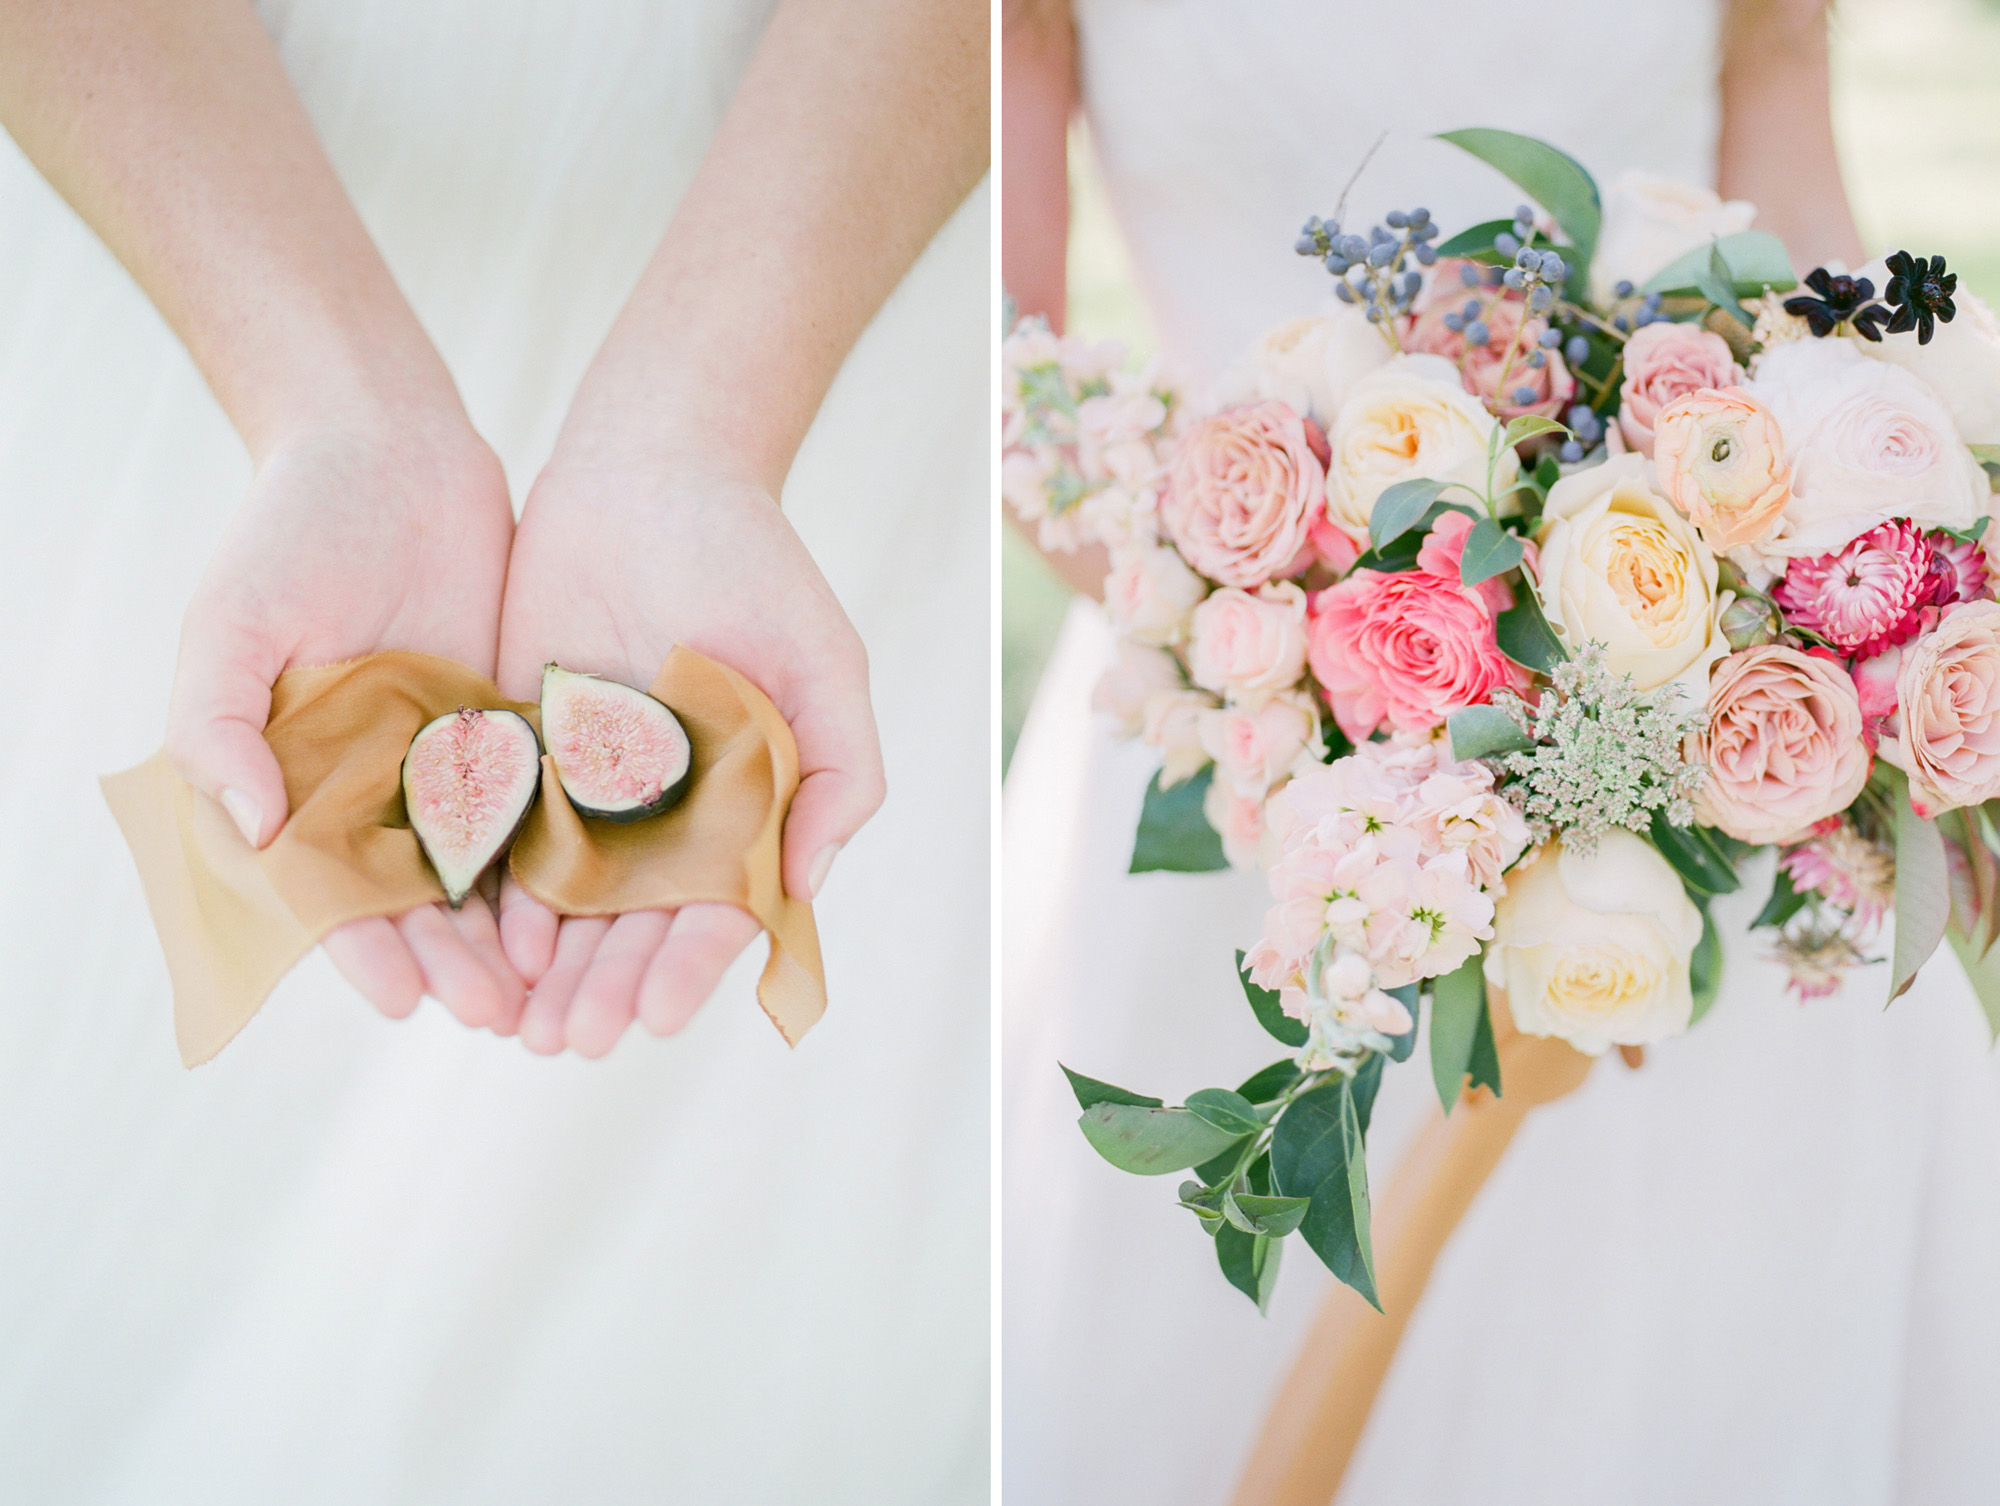 Beautiful bridal details from a Dallas wedding by film photographer Tenth & Grace.